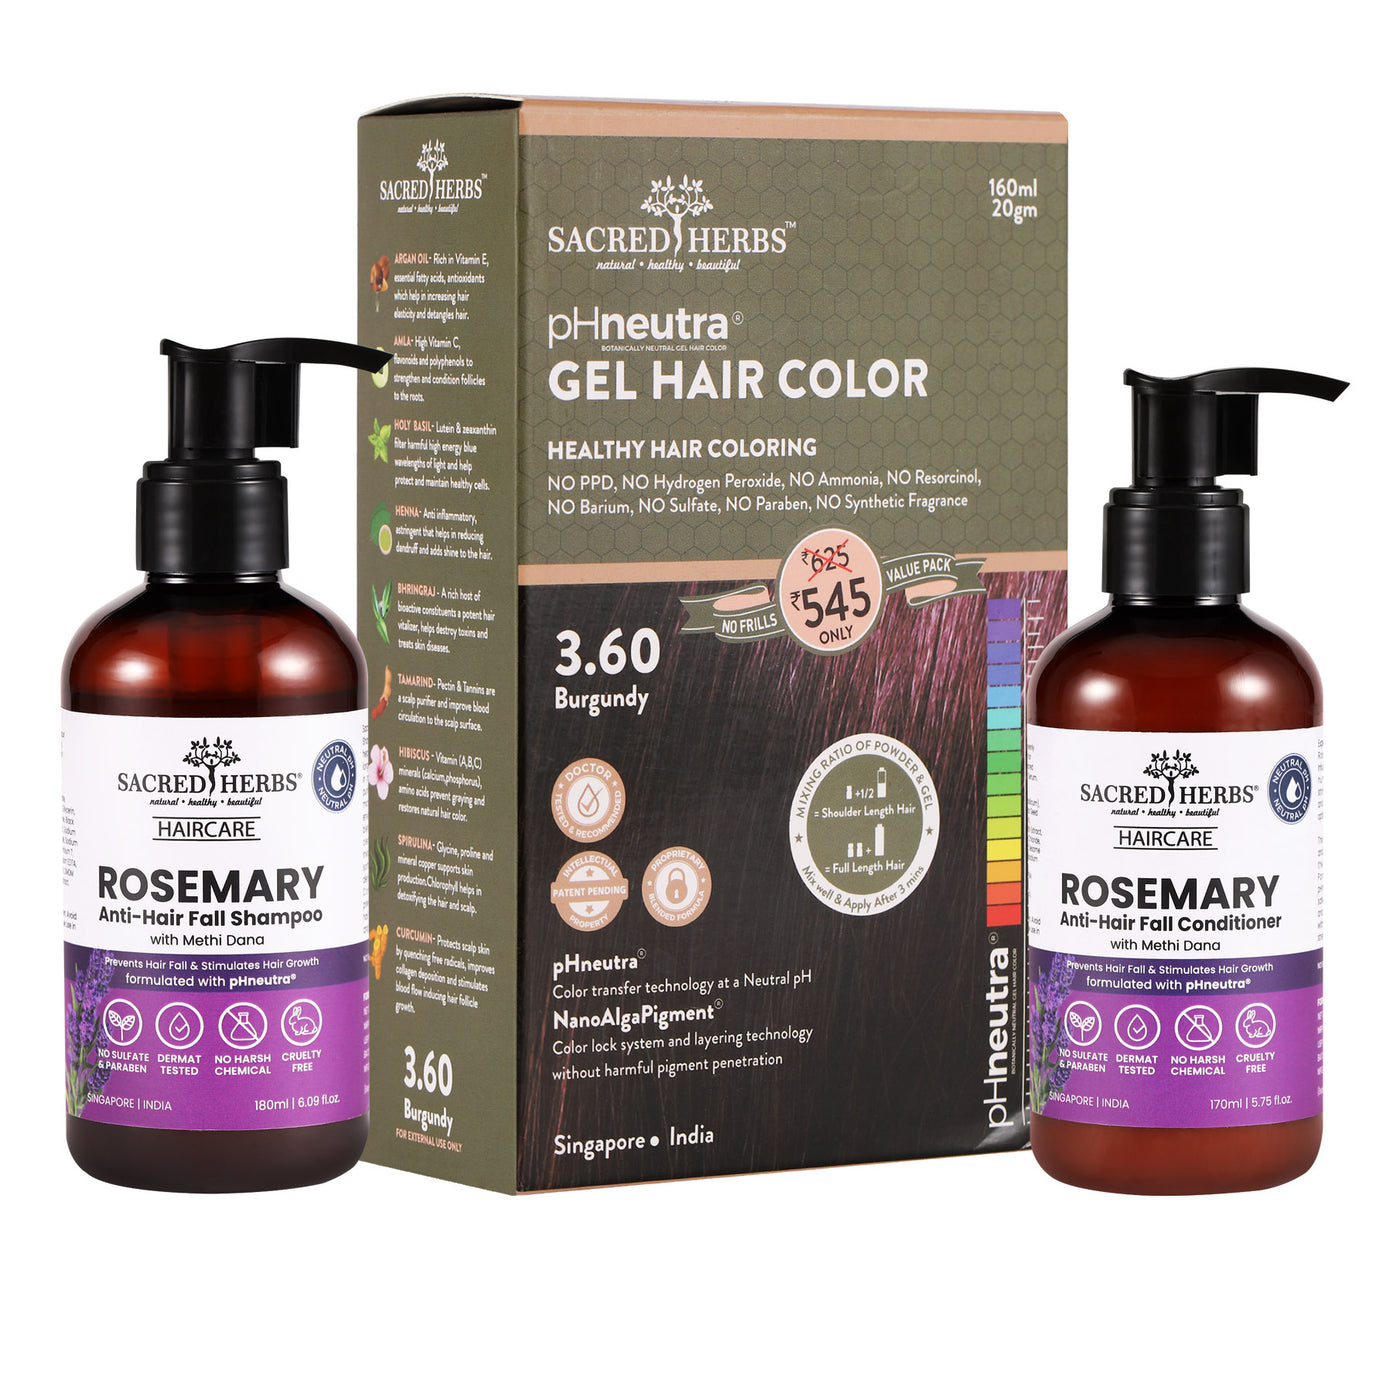 Rosemary Methi Dana Hair Care : Complete Hair Color Value Pack